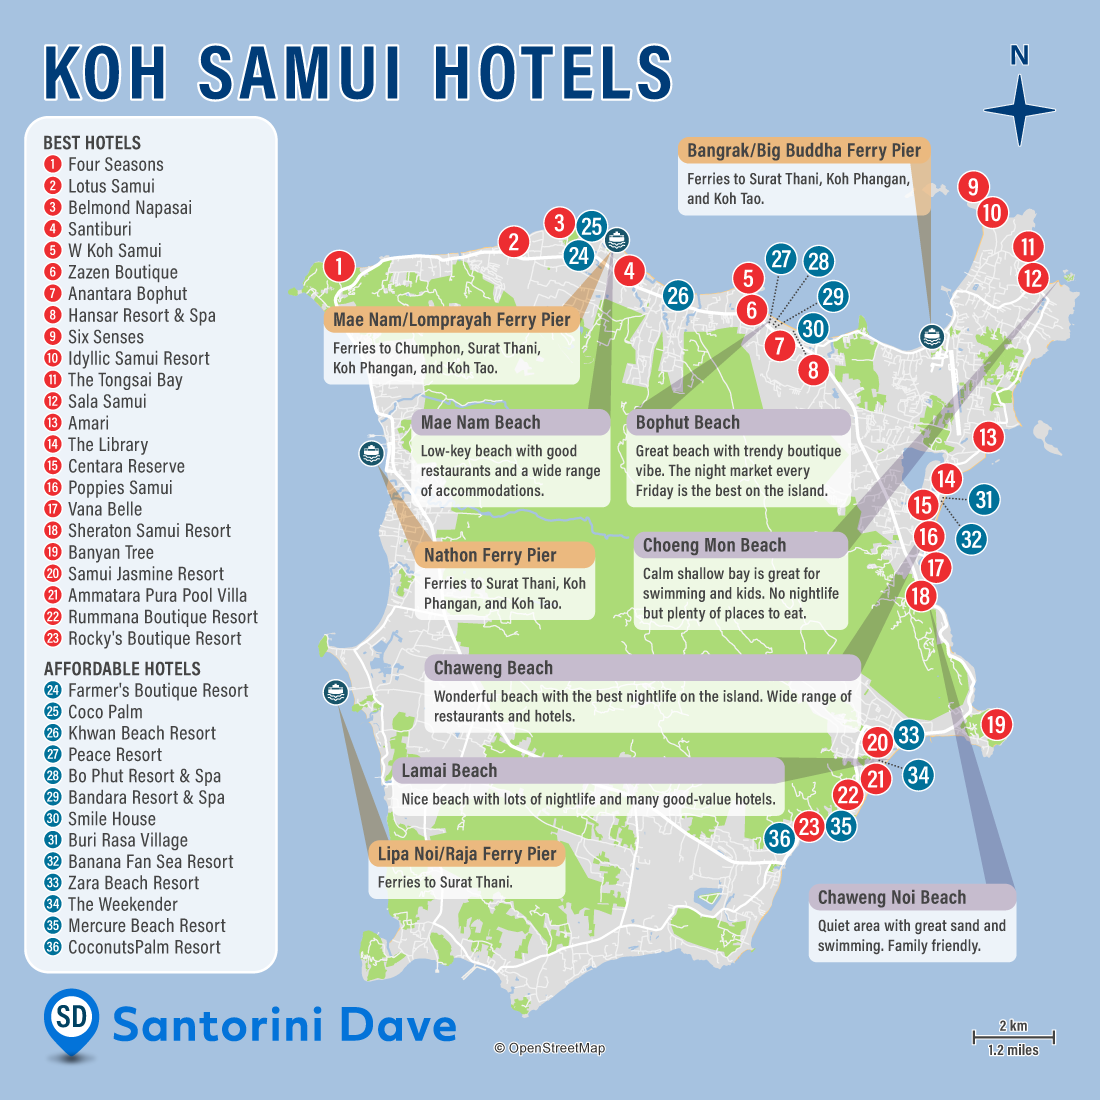 Map of Best Hotels, Resorts, and Beaches in Koh Samui, Thailand.